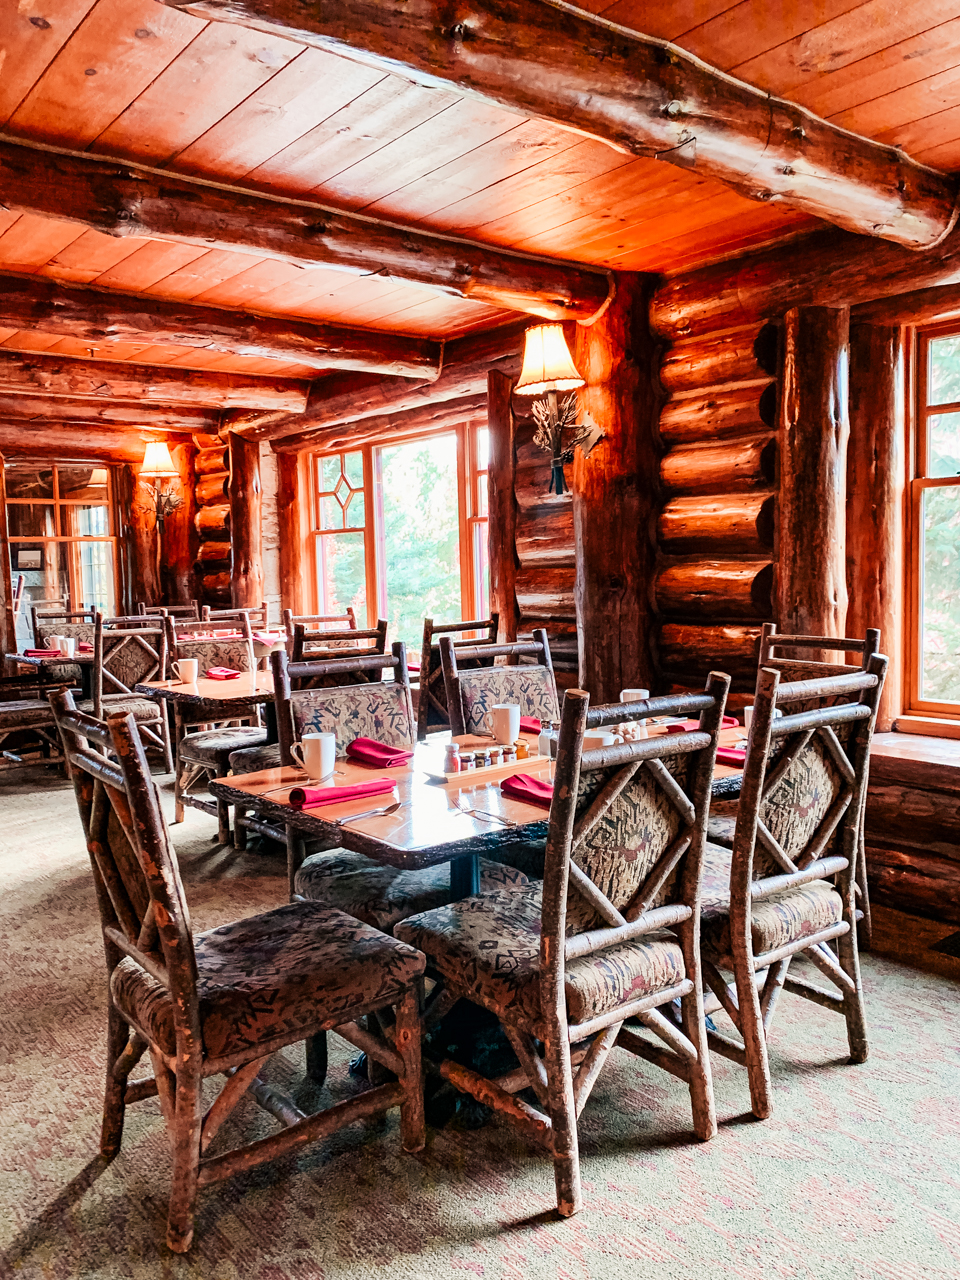 The Whiteface Lodge in Lake Placid review featured by New England travel photographer and blogger, Shannon Shipman